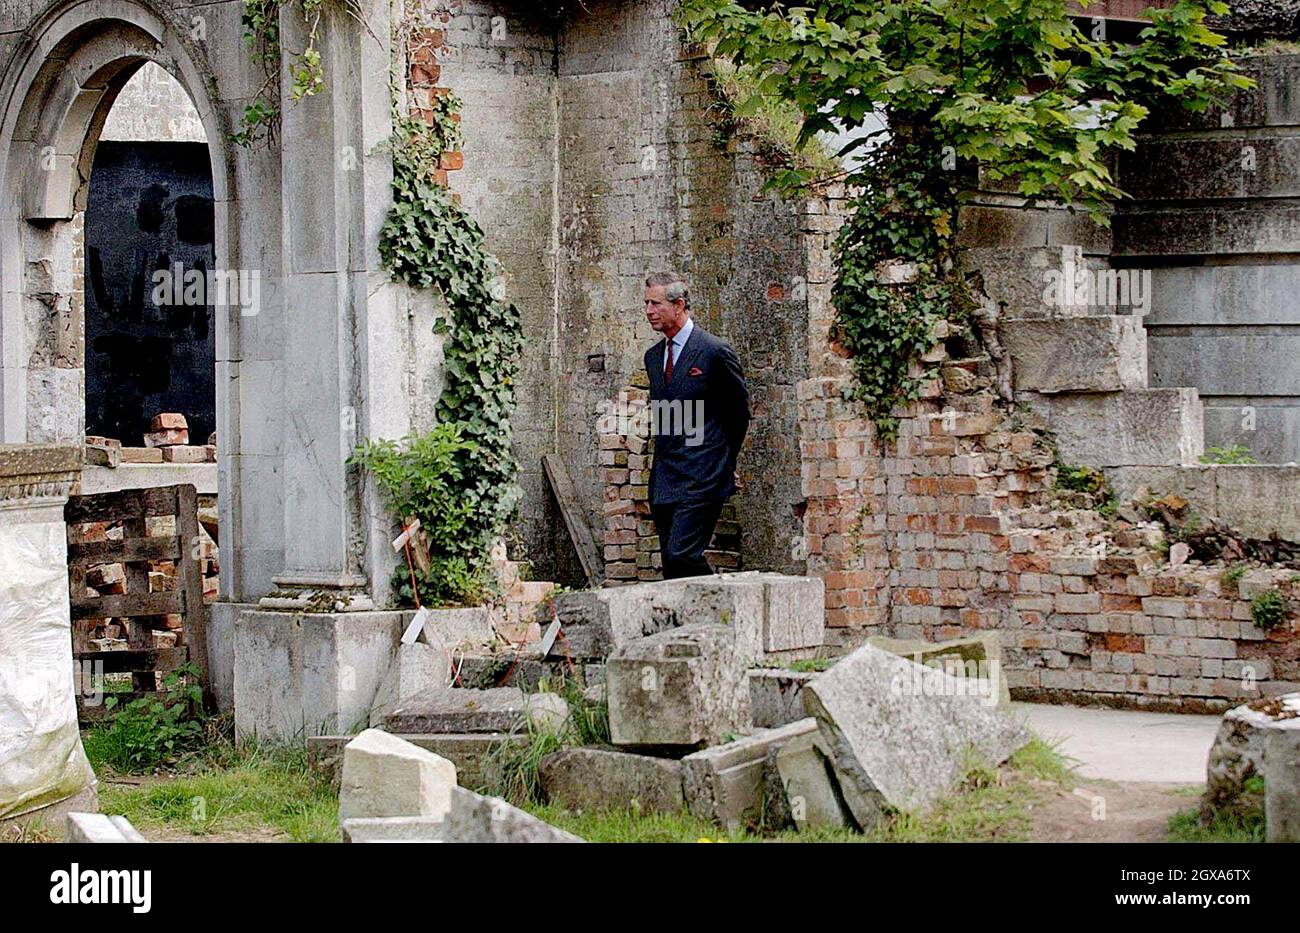 The Prince of Wales views a walled garden at Cressing Temple in Essex, during his visit to the 16th Century Cressing Estate. The site comprises of ancient barns and buildings and was restored in 1987 by the county council. Charles was there in 1991 and returns today to see new additions, including the development of a Tudor garden.   Stock Photo